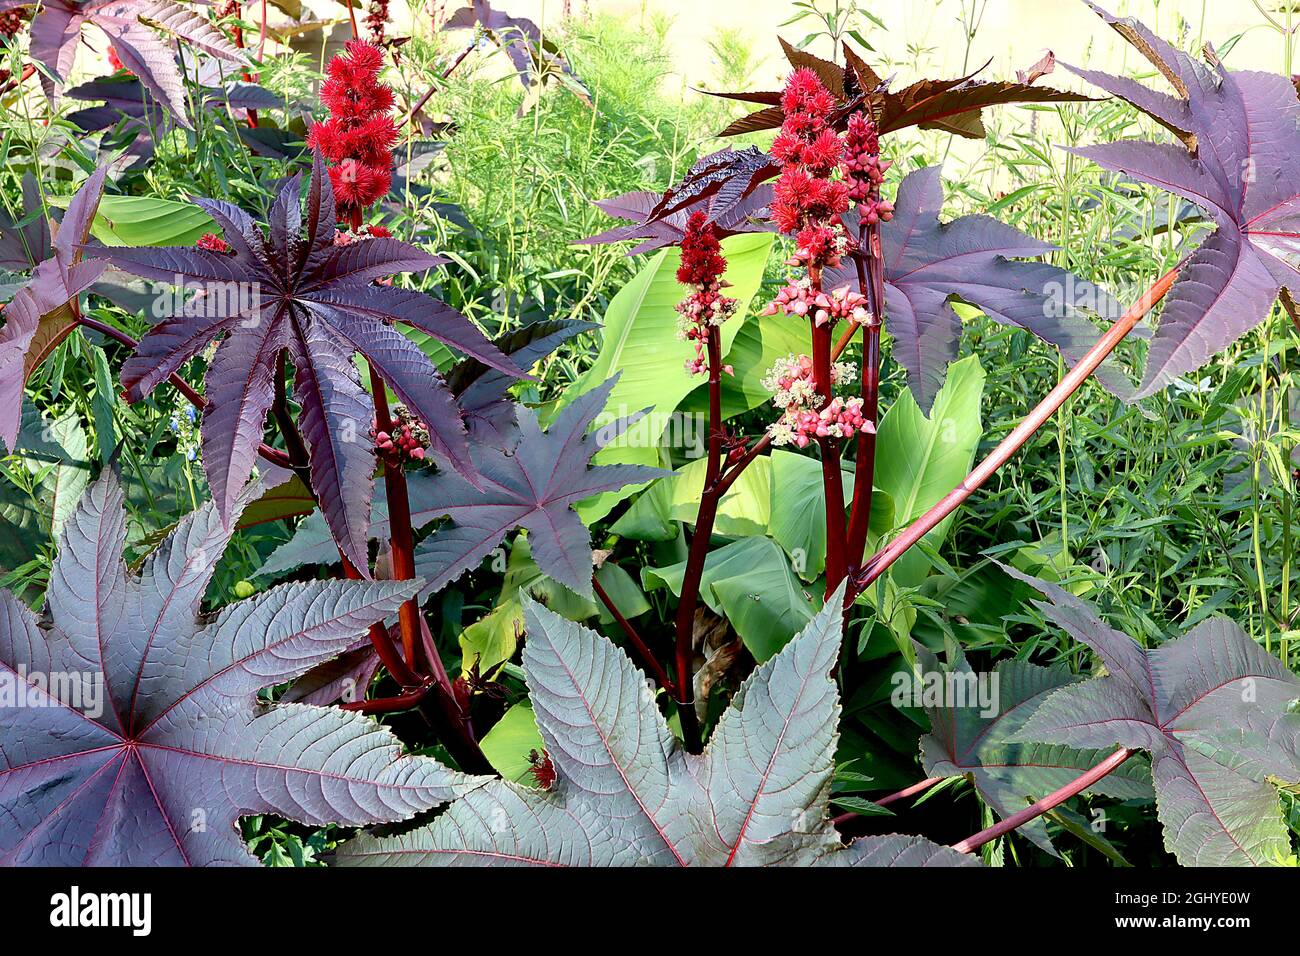 Ricinis communis ‘Carmencita’ castor oil plant Carmencita – pointed oval pink flower buds, tiny white flower clusters, large palmately lobed leaves, Stock Photo